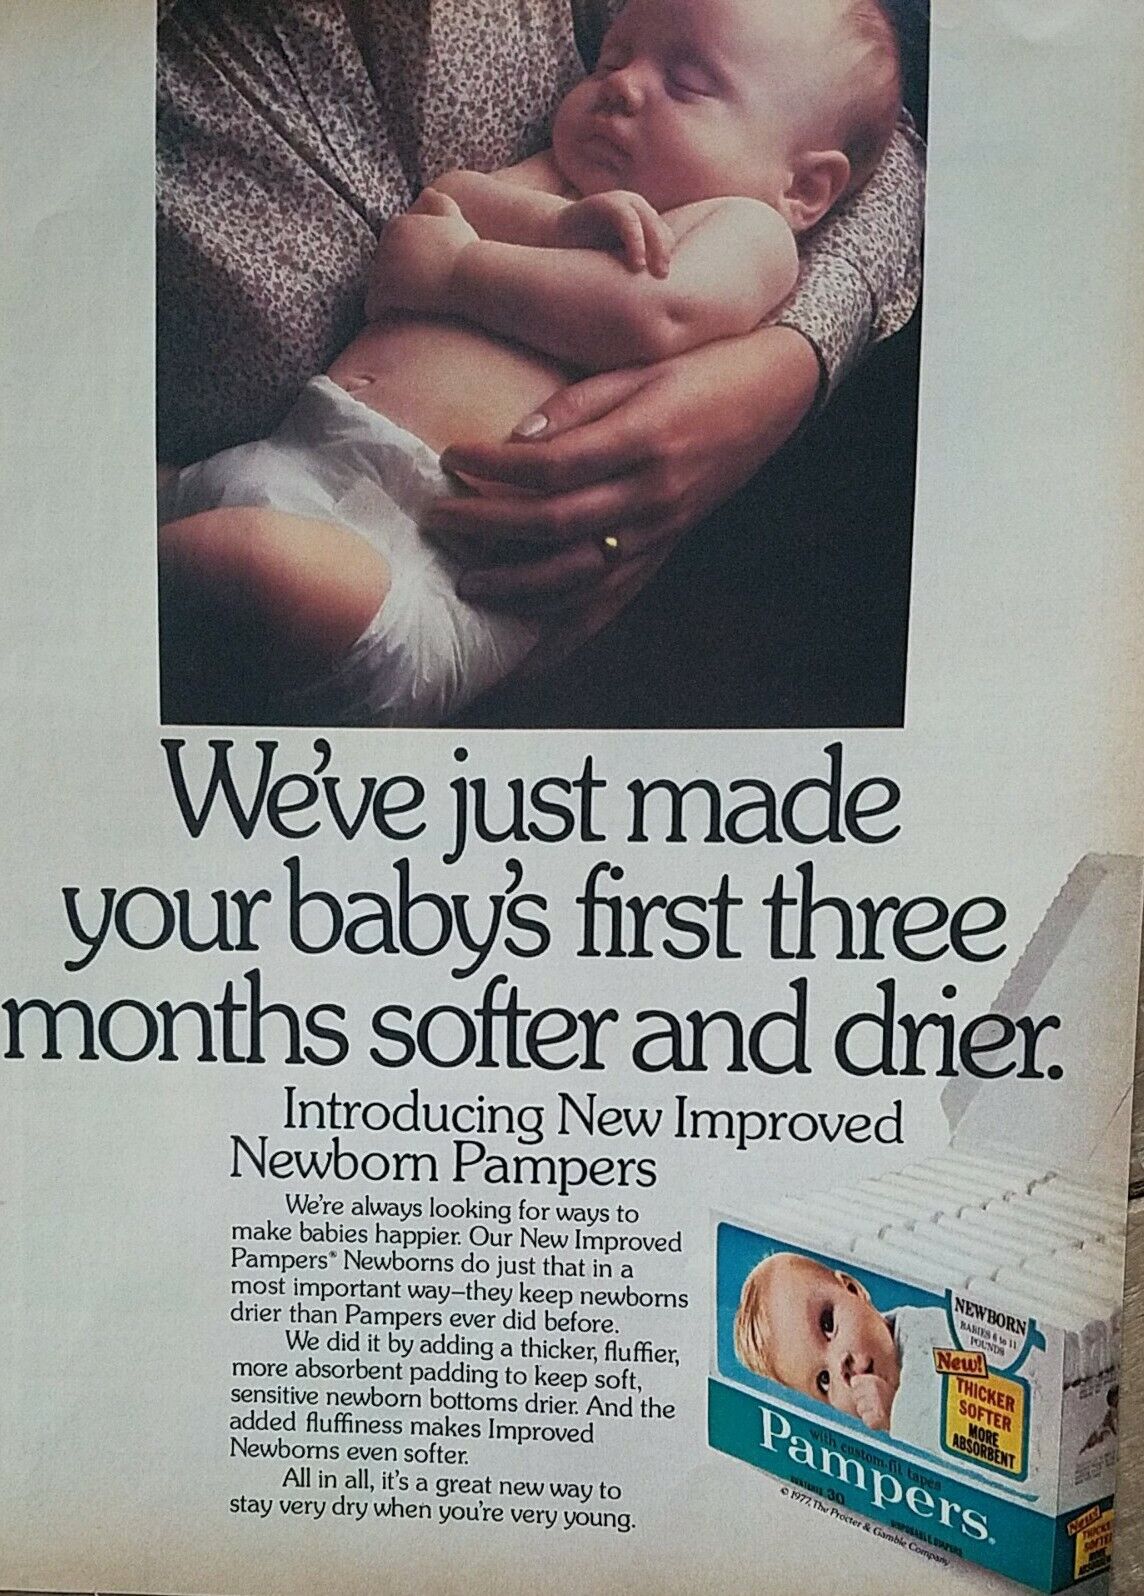 1977 Pampers introducing new improved newborn baby diapers ad